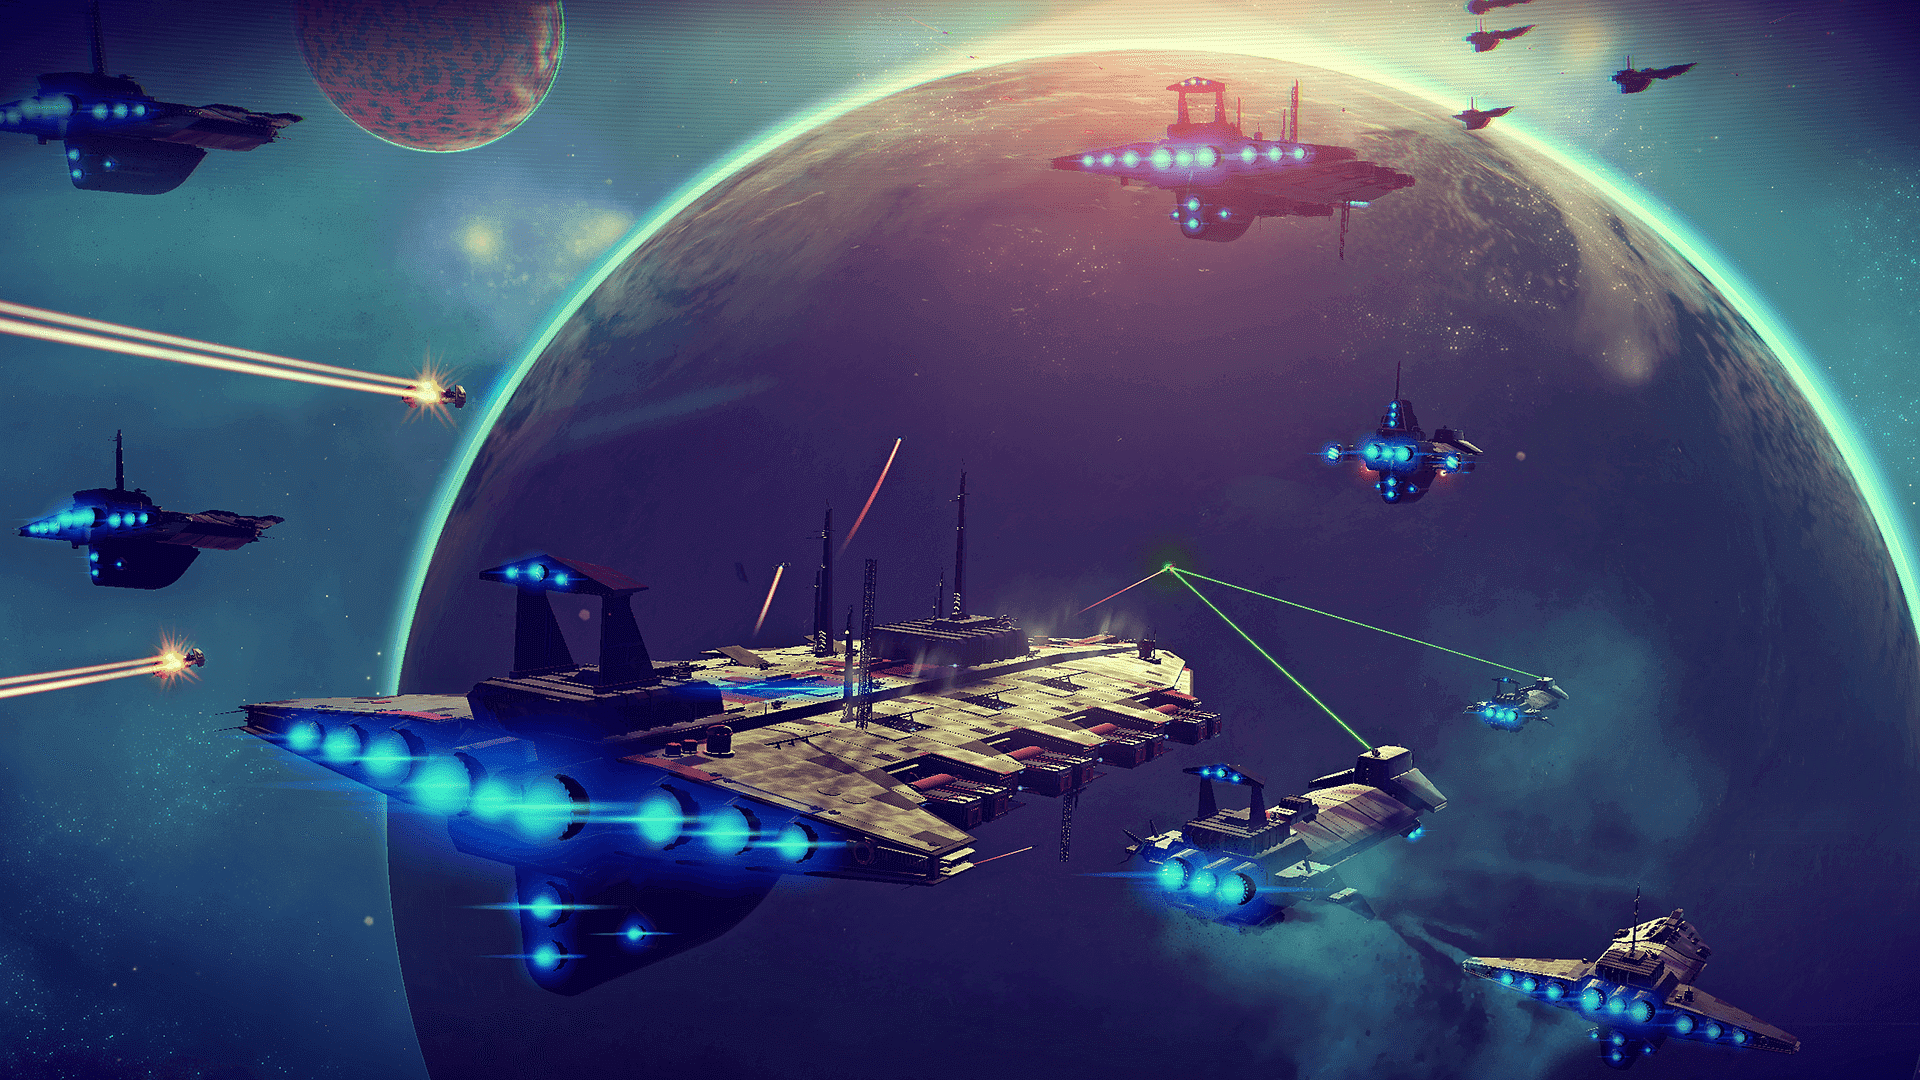 An image showing spaceships from No Man's Sky Echoes update